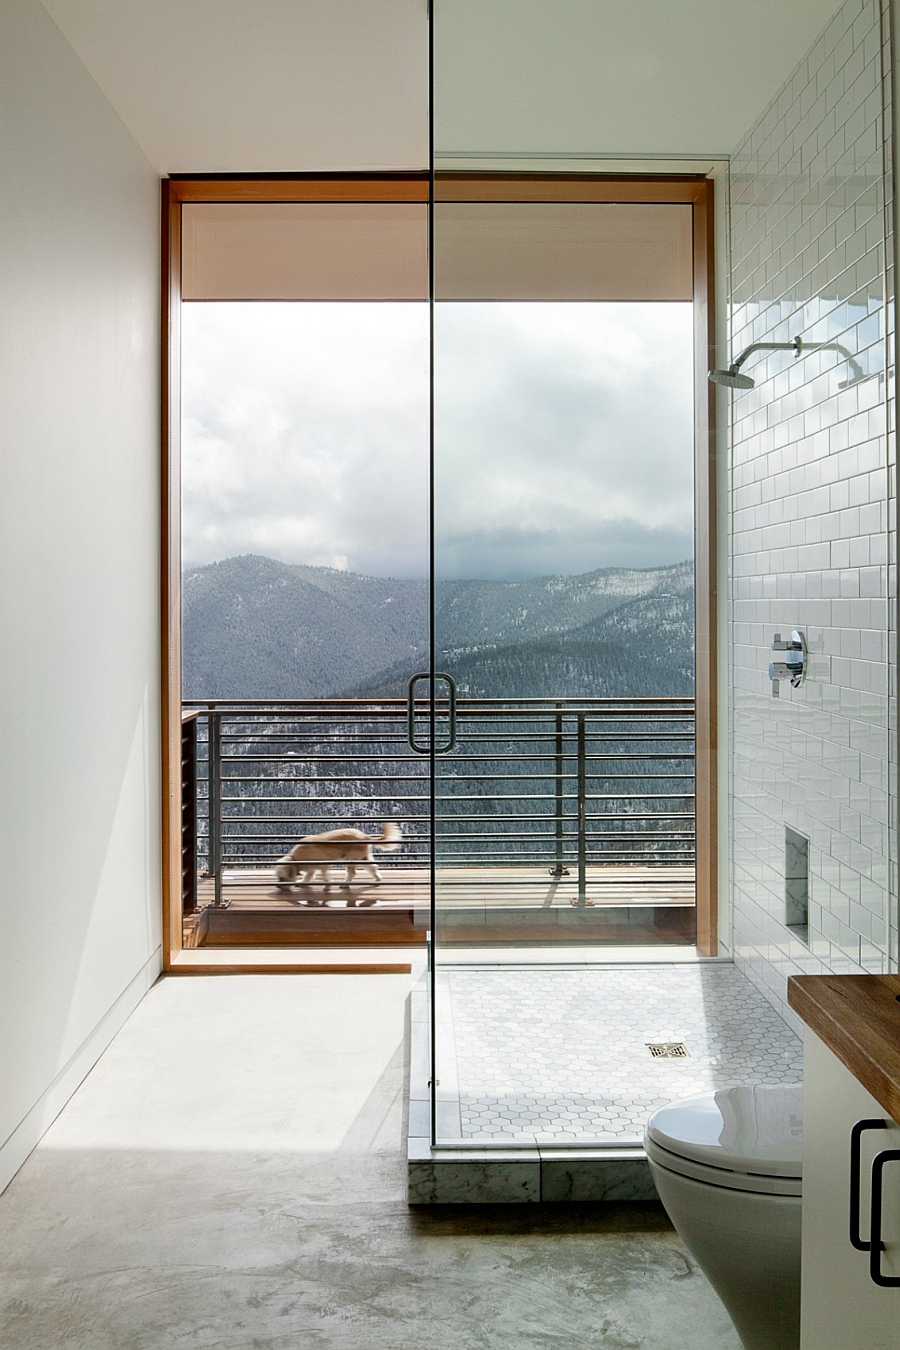 Glass shower enclosure connected with the deck space